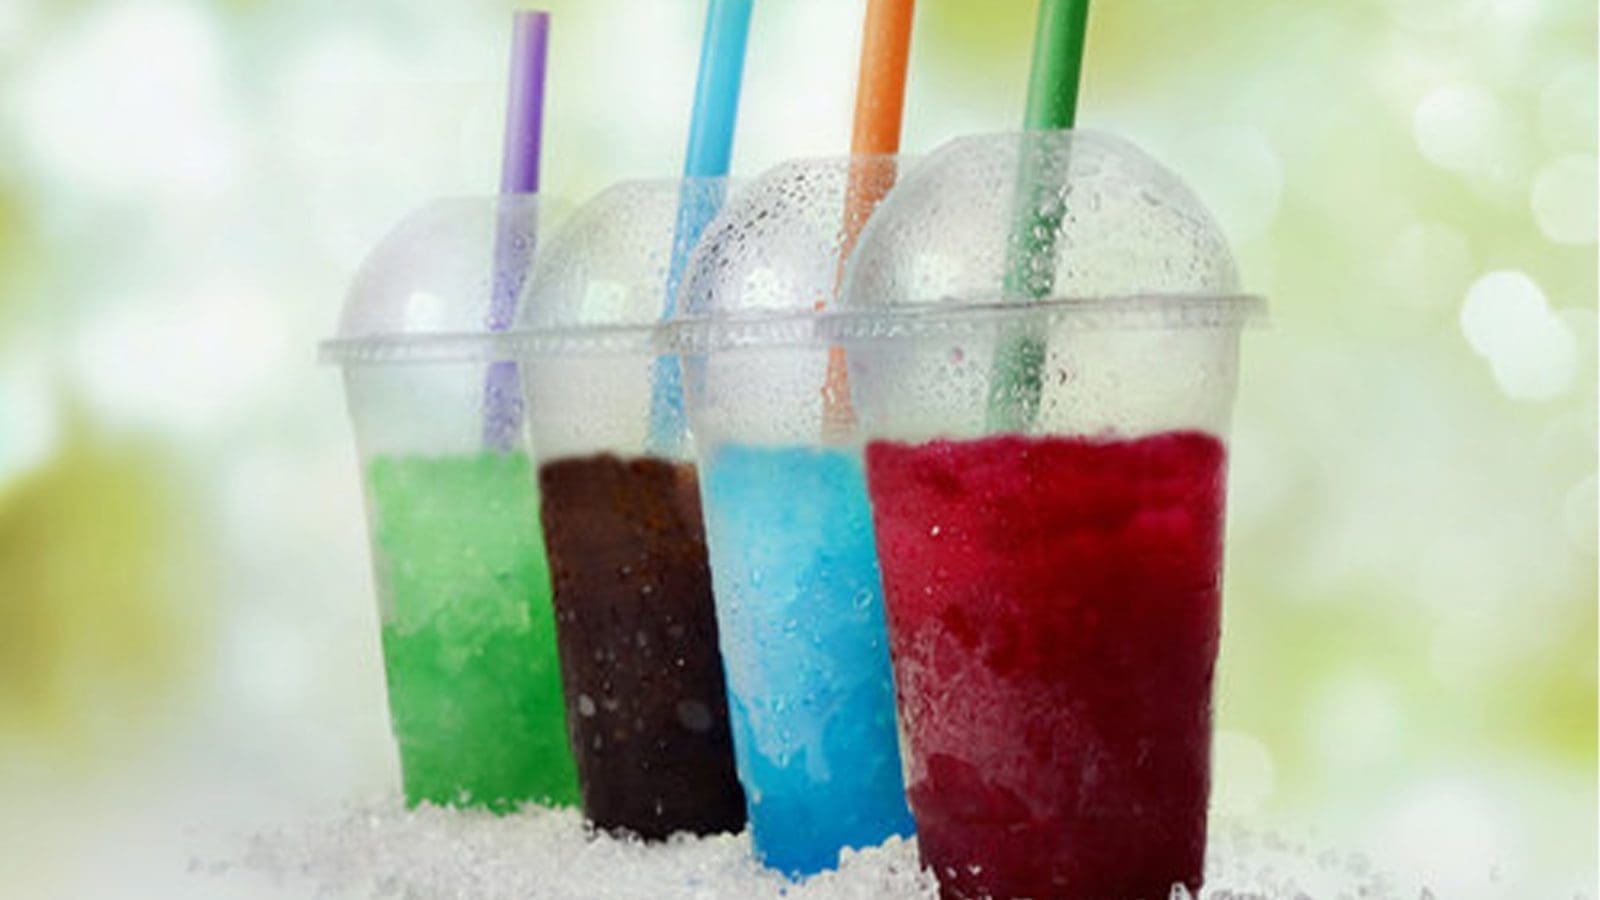 UK Food Standards Agency introduces voluntary guidelines to protect children from glycerol in slush-ice drinks